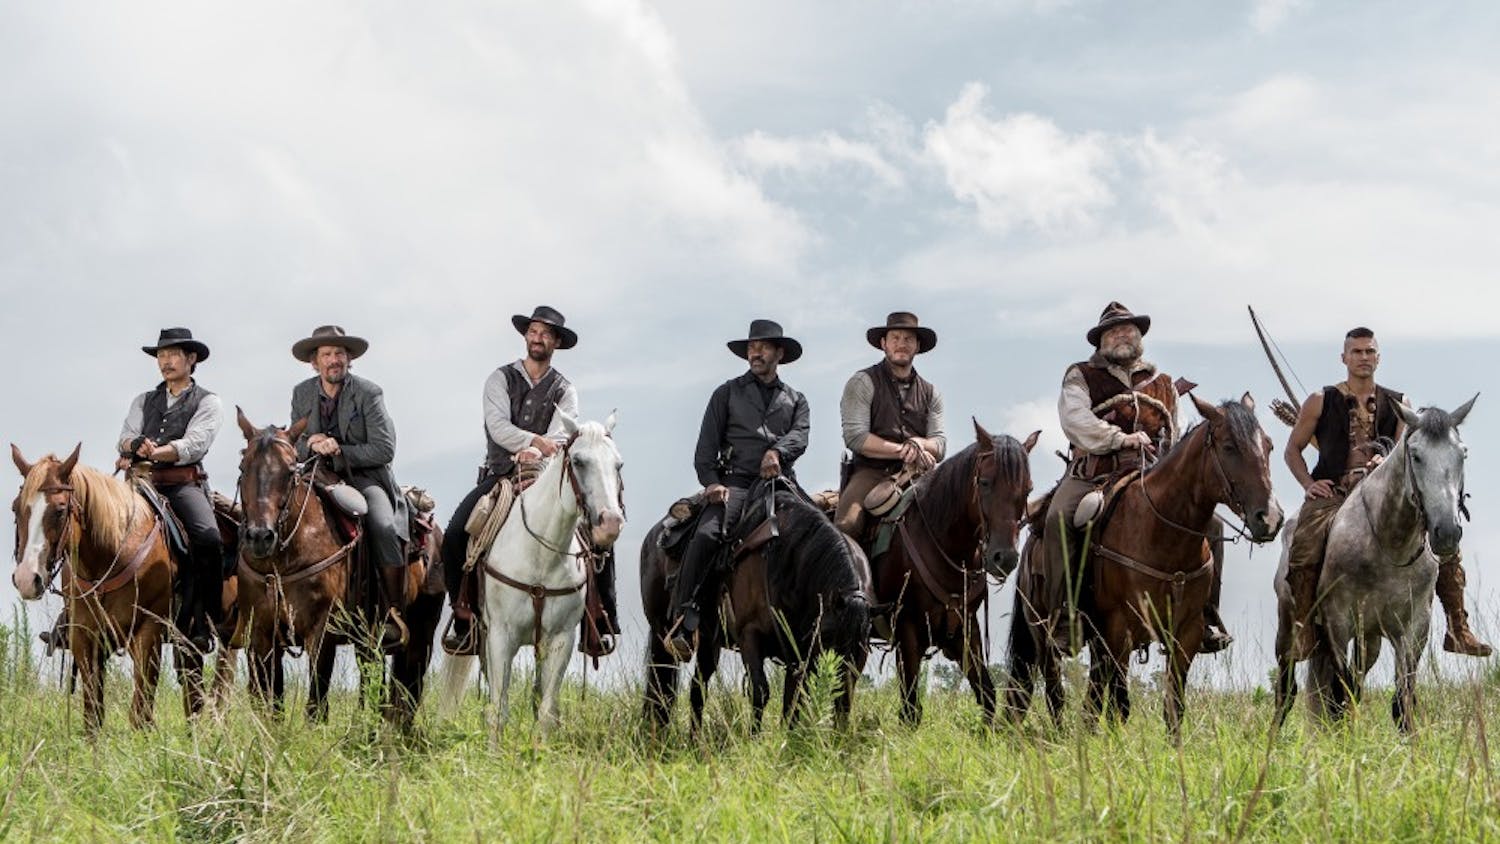 (l to r) Byung-hun Lee, Ethan Hawke, Manuel Garcia-Rulfo, Denzel Washington, Chris Pratt, Vincent D'Onofrio and Martin Sensmeier in Metro-Goldwyn-Mayer Pictures and Columbia Pictures' THE MAGNIFICENT SEVEN.